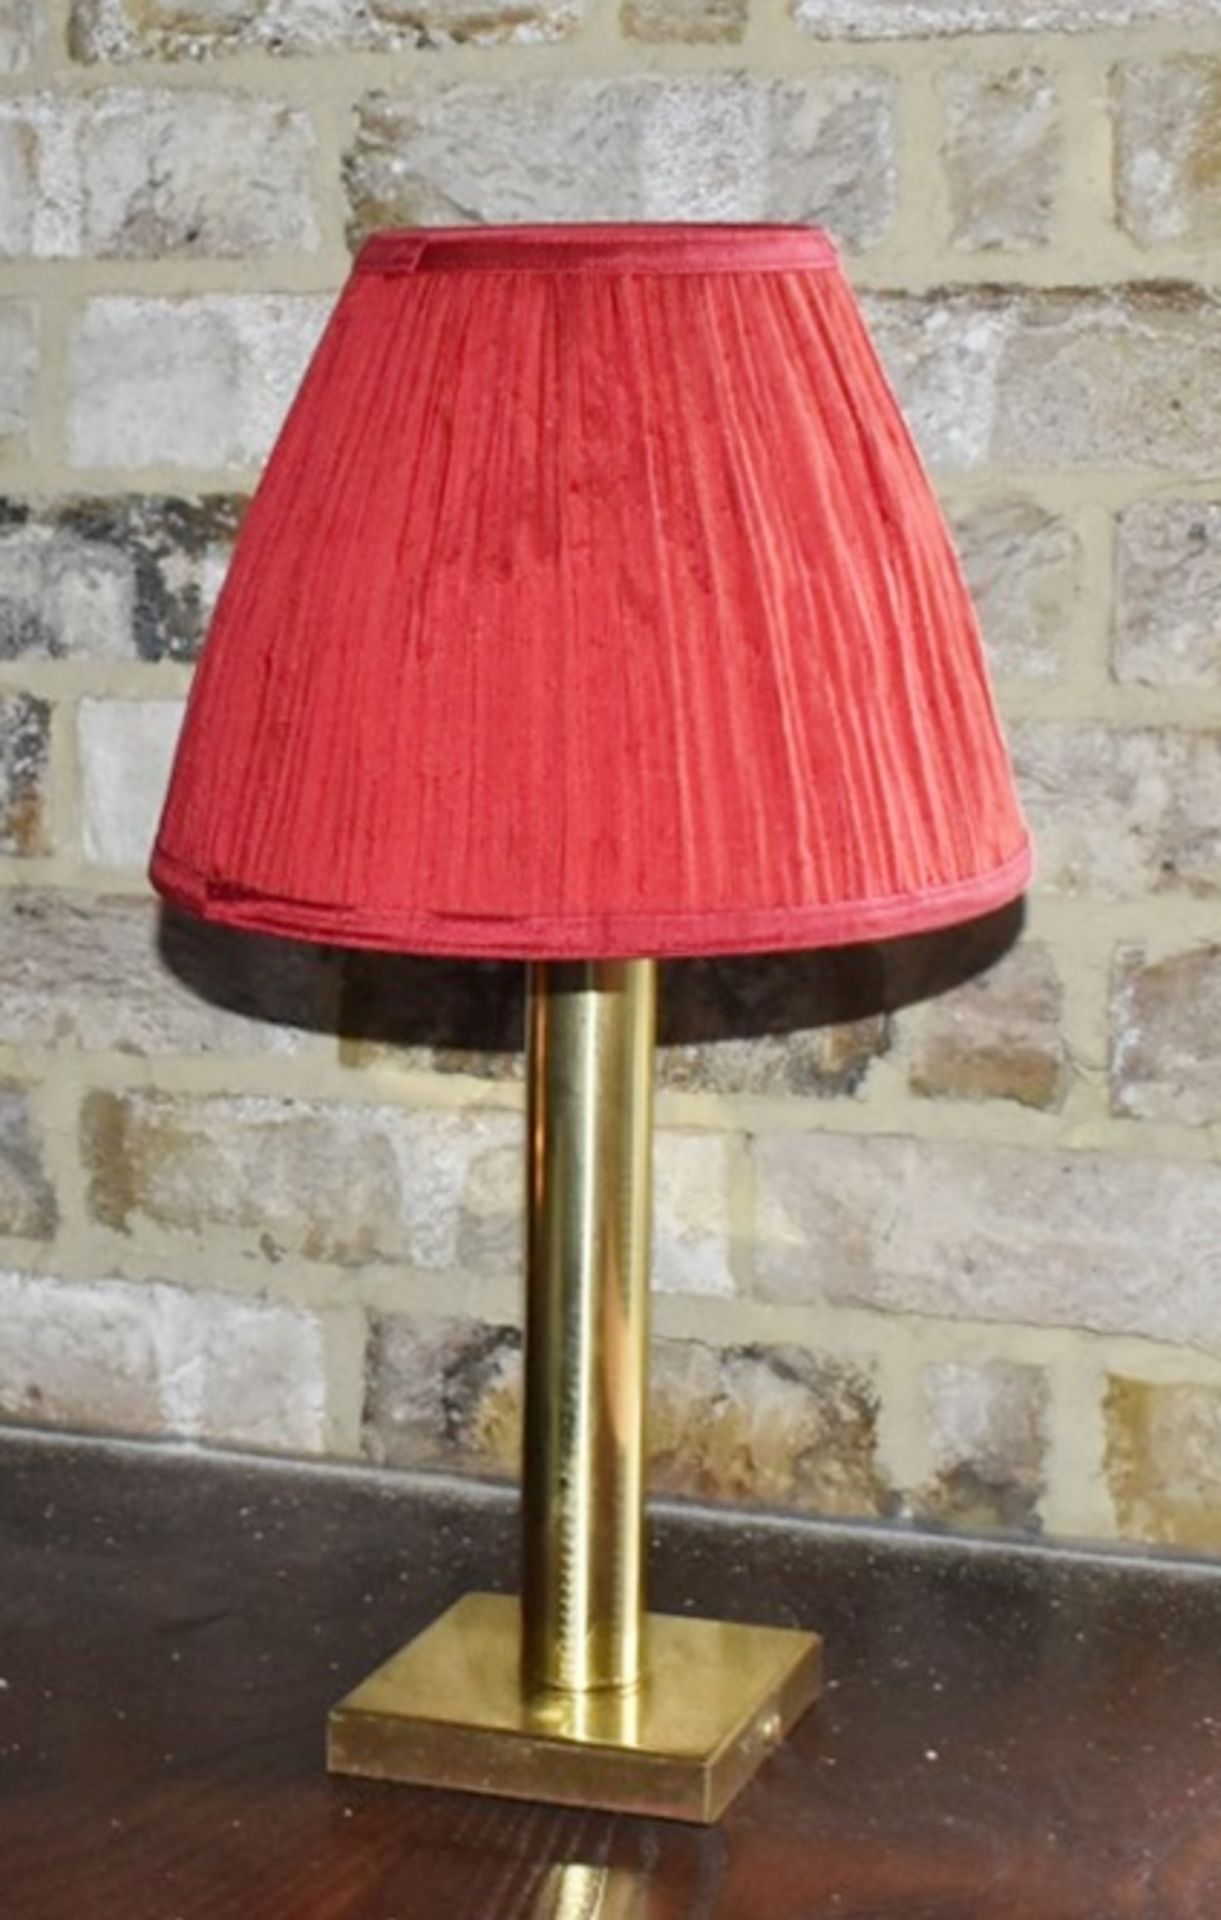 5 x Fixed Table Lamps With a Brass Finish and Red Shades -Total Height 46cms - Image 3 of 3